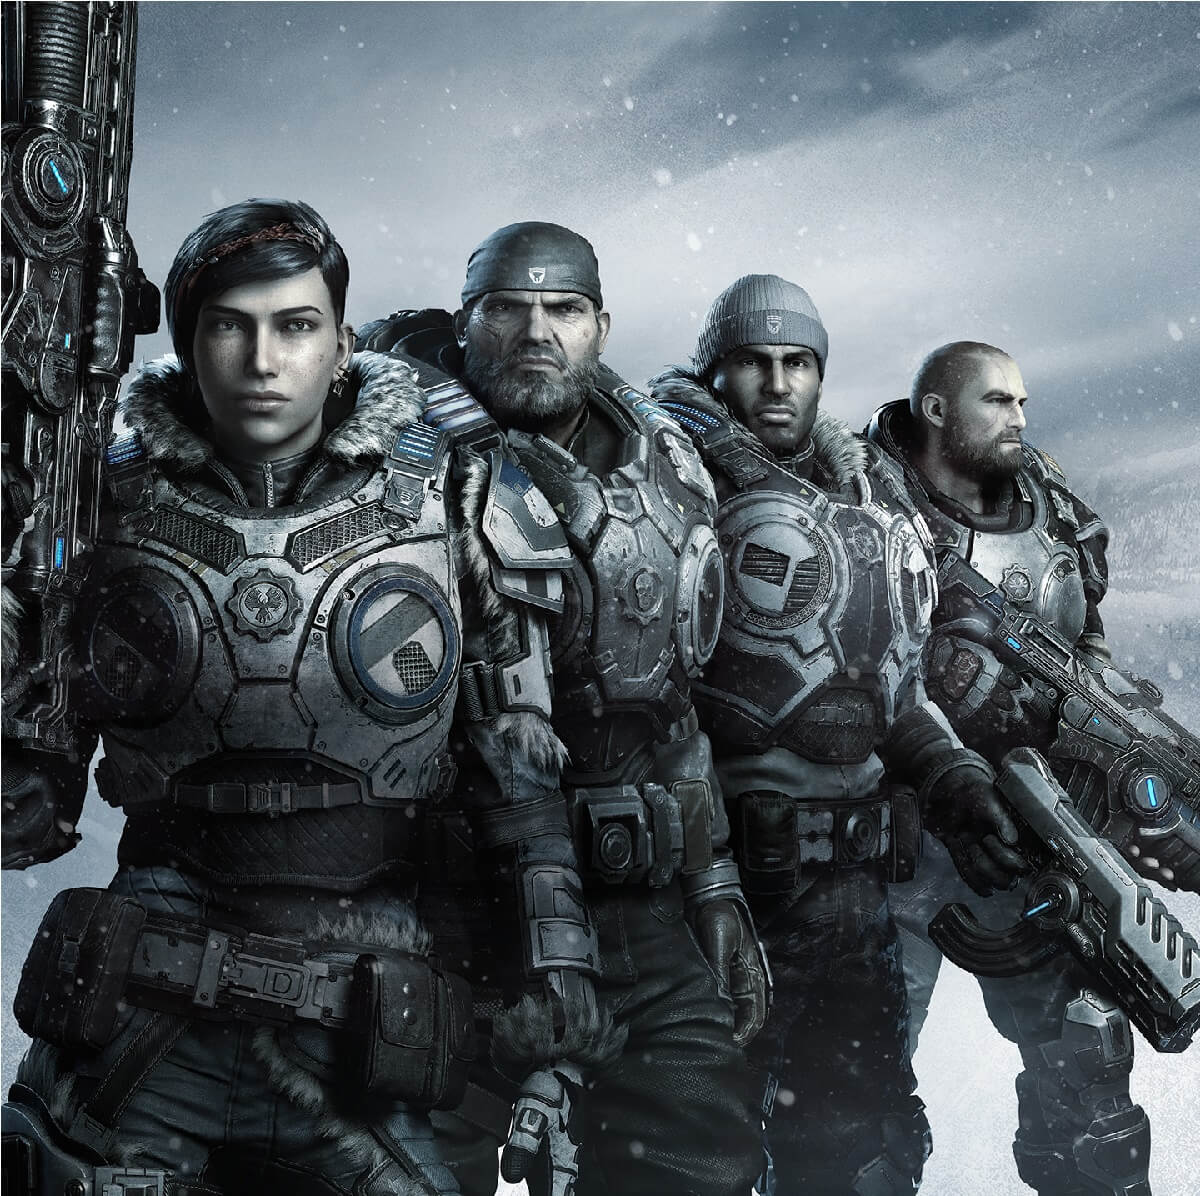 Gears 5 - Ultra-HD Texture Pack on Steam